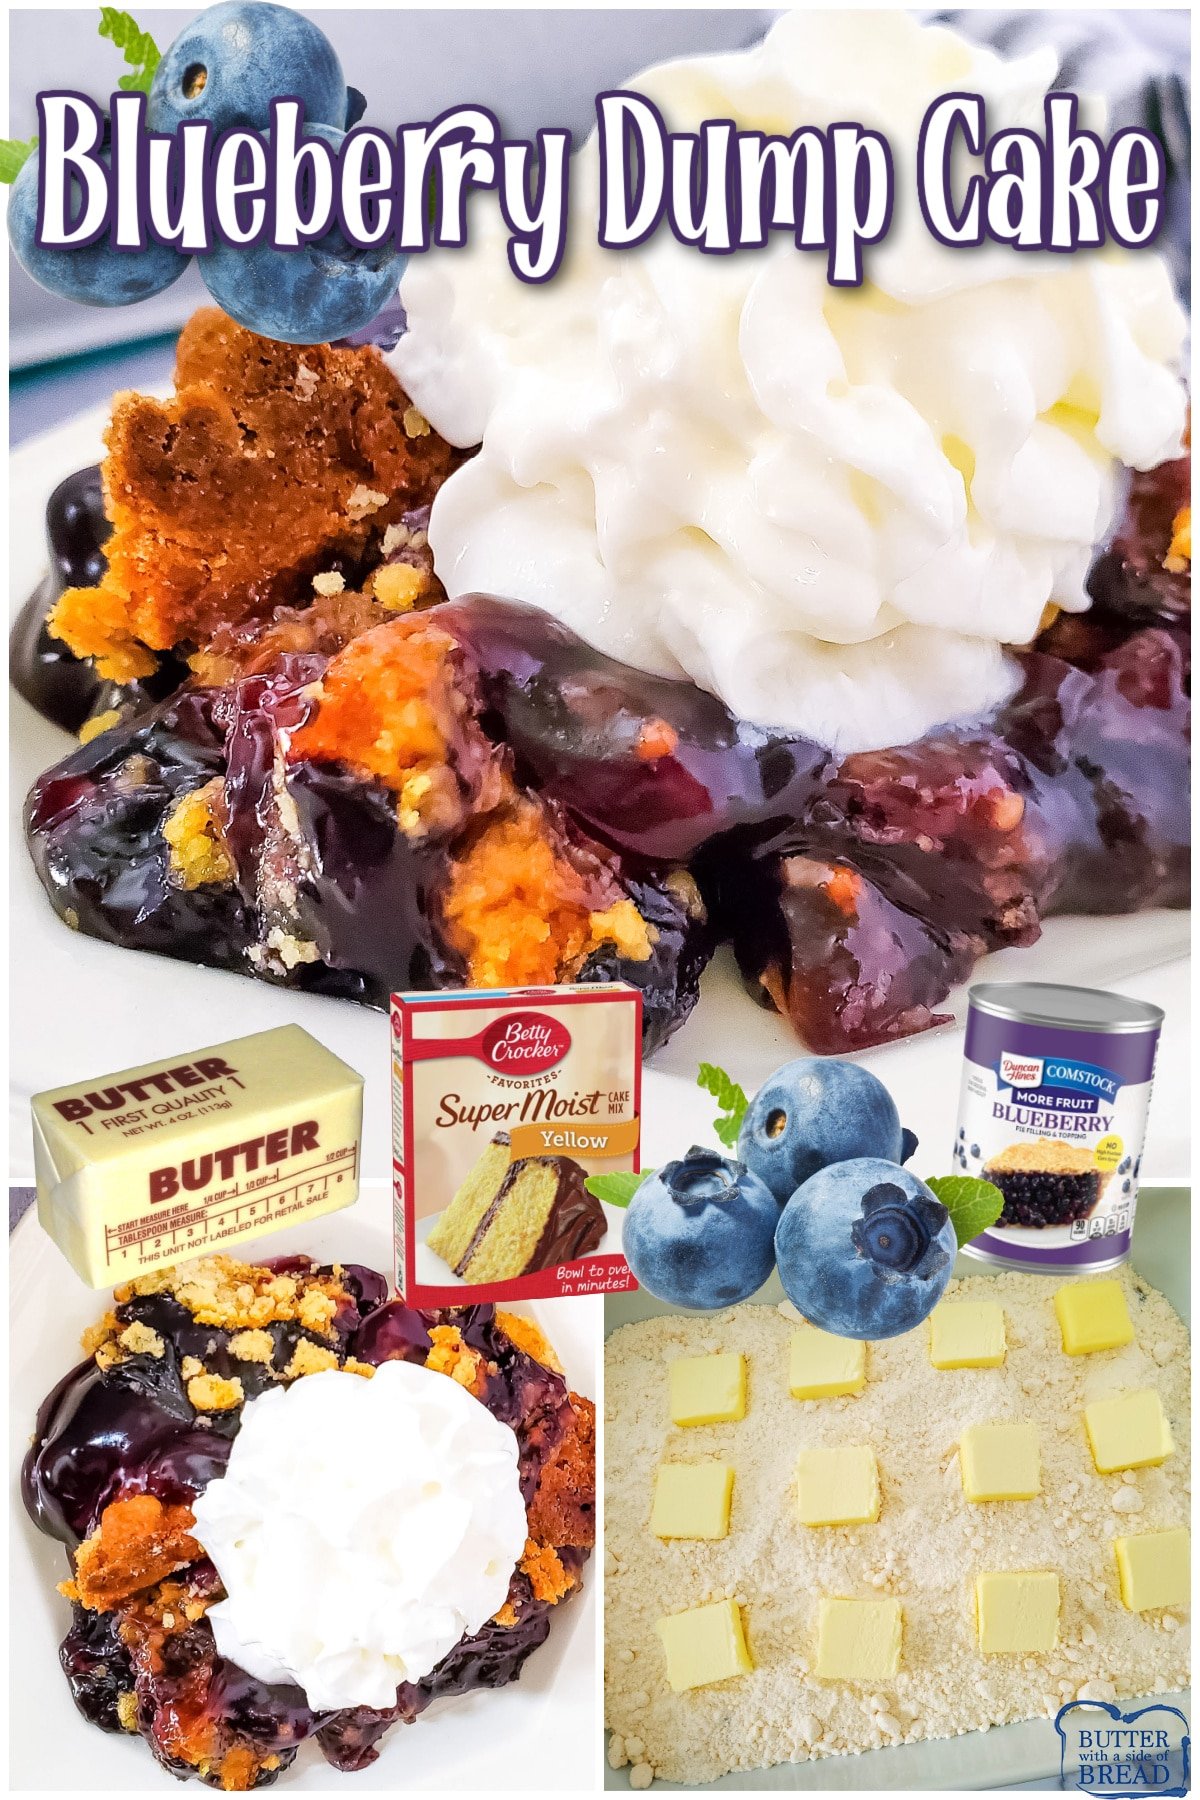 Blueberry Dump Cake is a fantastic dessert, made with blueberry pie filling & cake mix! This simple fruit dump cake recipe could not be any easier to make!